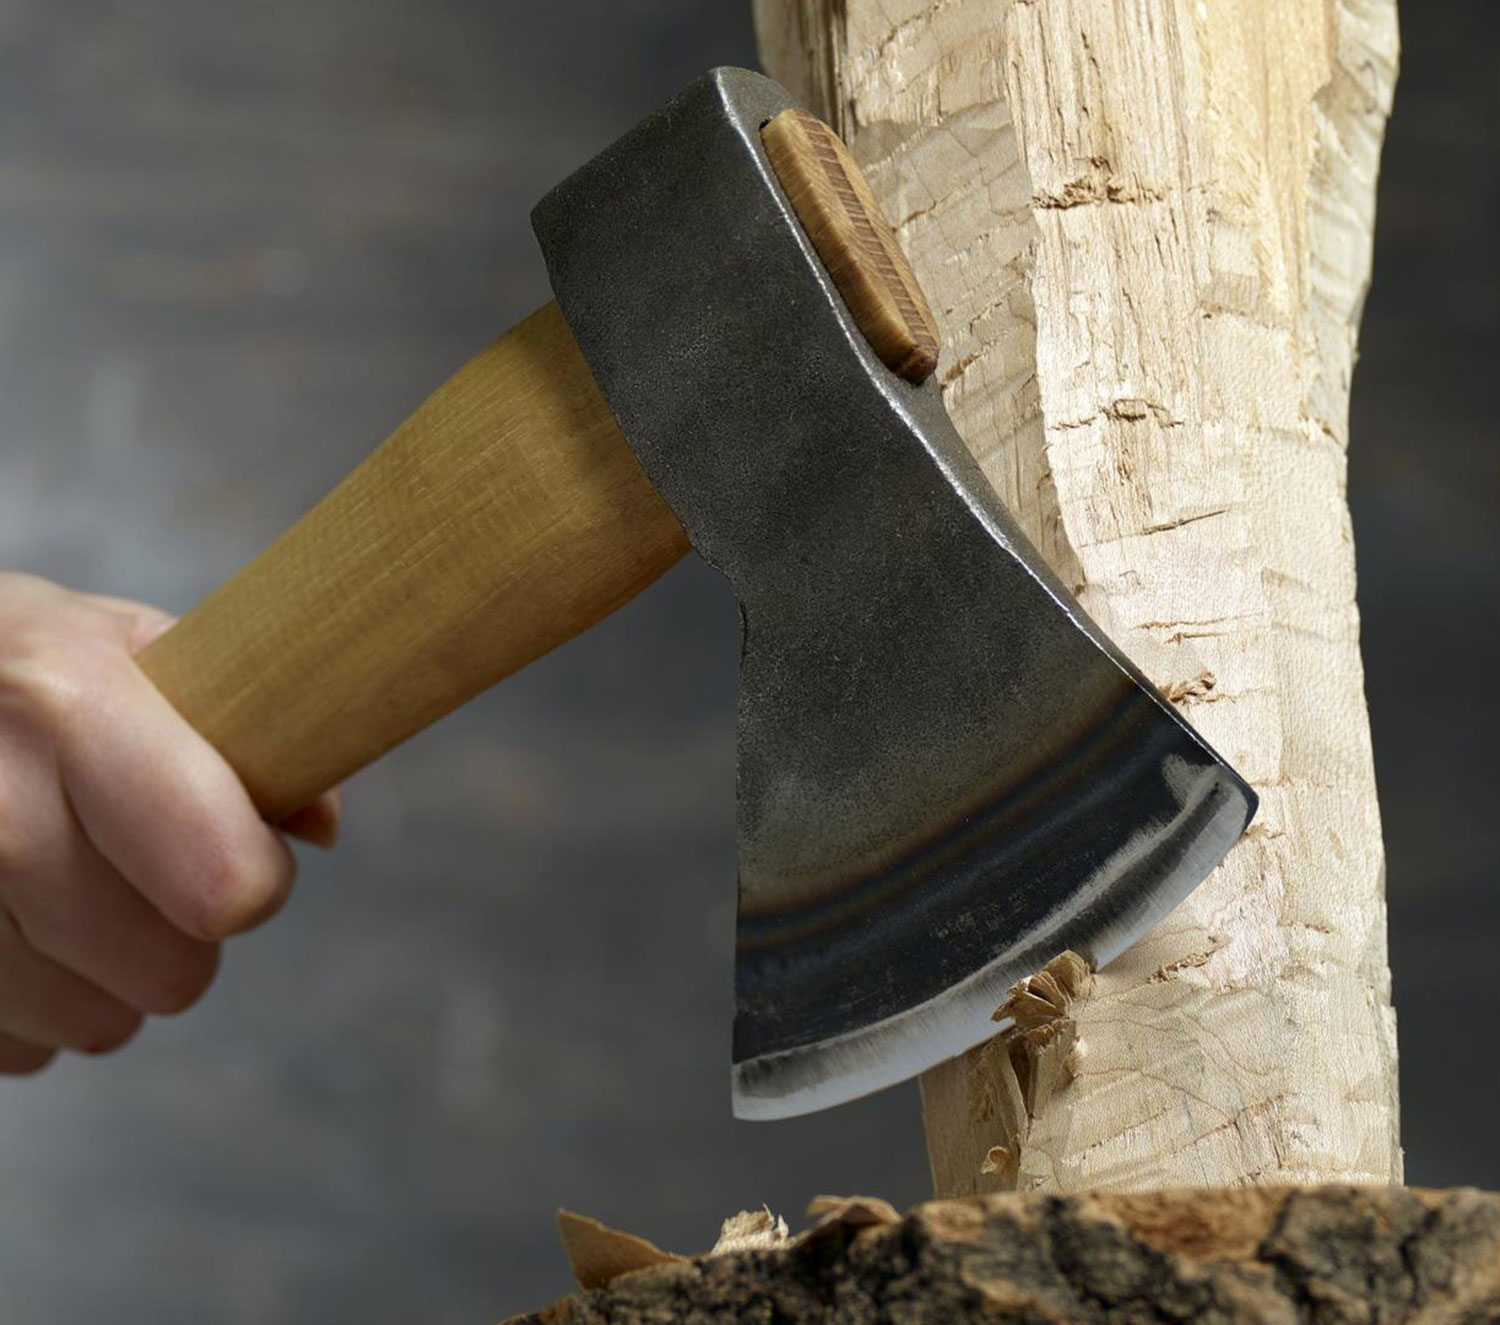 Using a carving axe to rough out a wooden blank.